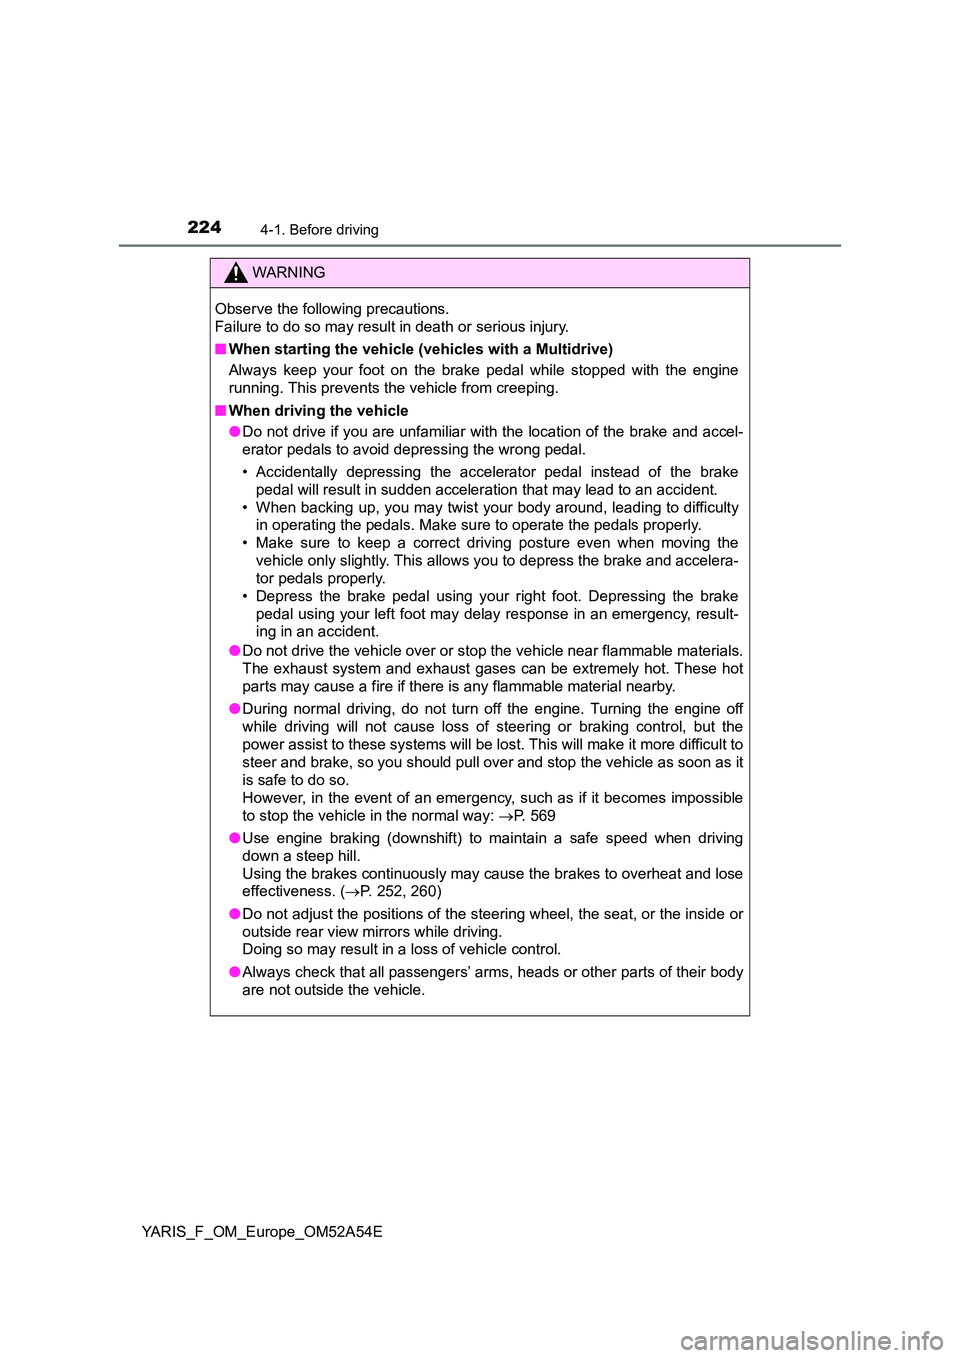 TOYOTA YARIS 2020  Owners Manual 2244-1. Before driving
YARIS_F_OM_Europe_OM52A54E
WARNING
Observe the following precautions.  
Failure to do so may result in death or serious injury. 
■ When starting the vehicle (vehicles with a M